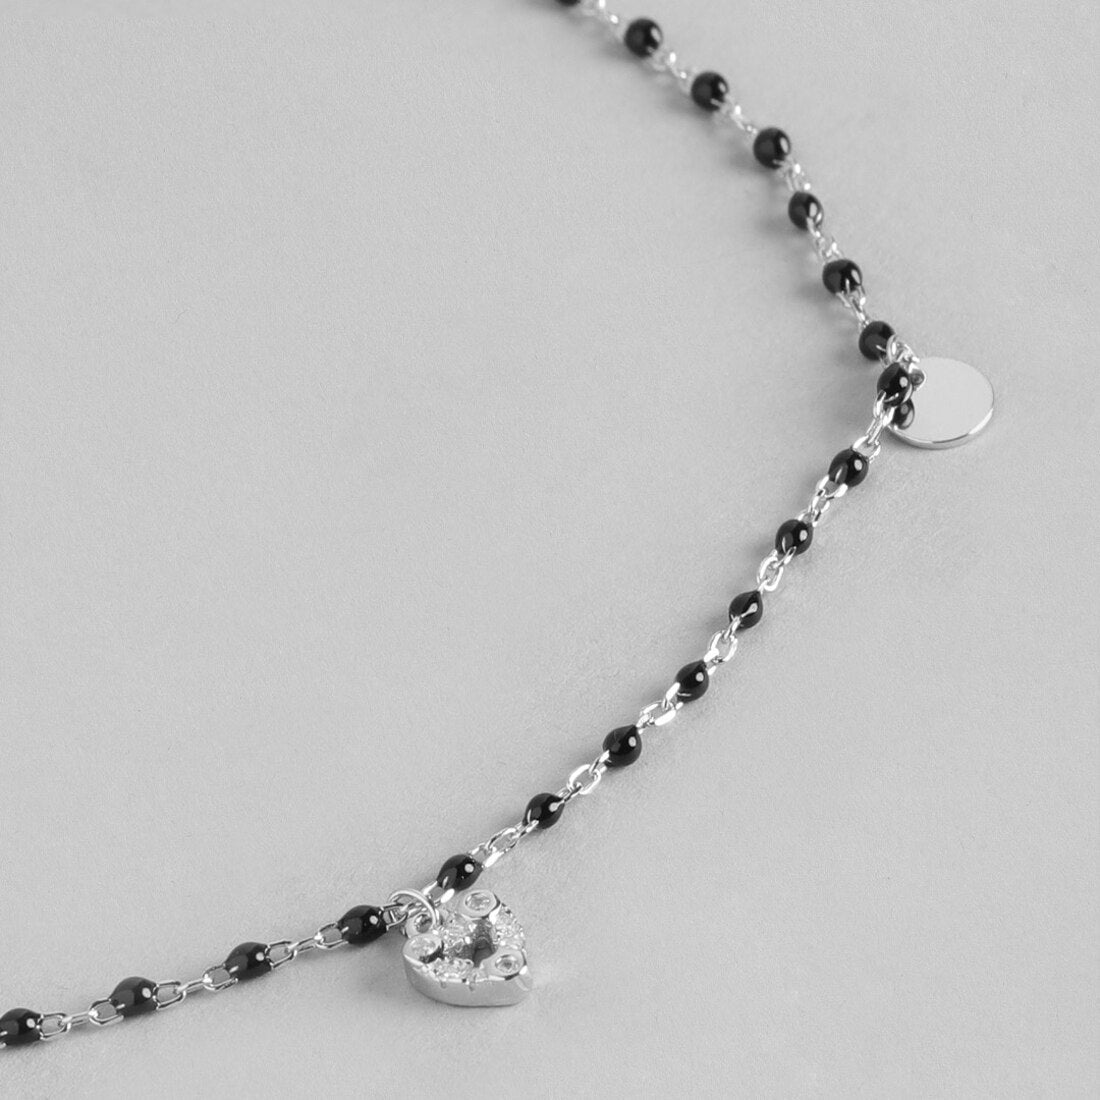 Black Beads with Heart Charms 925 Sterling Silver Anklet